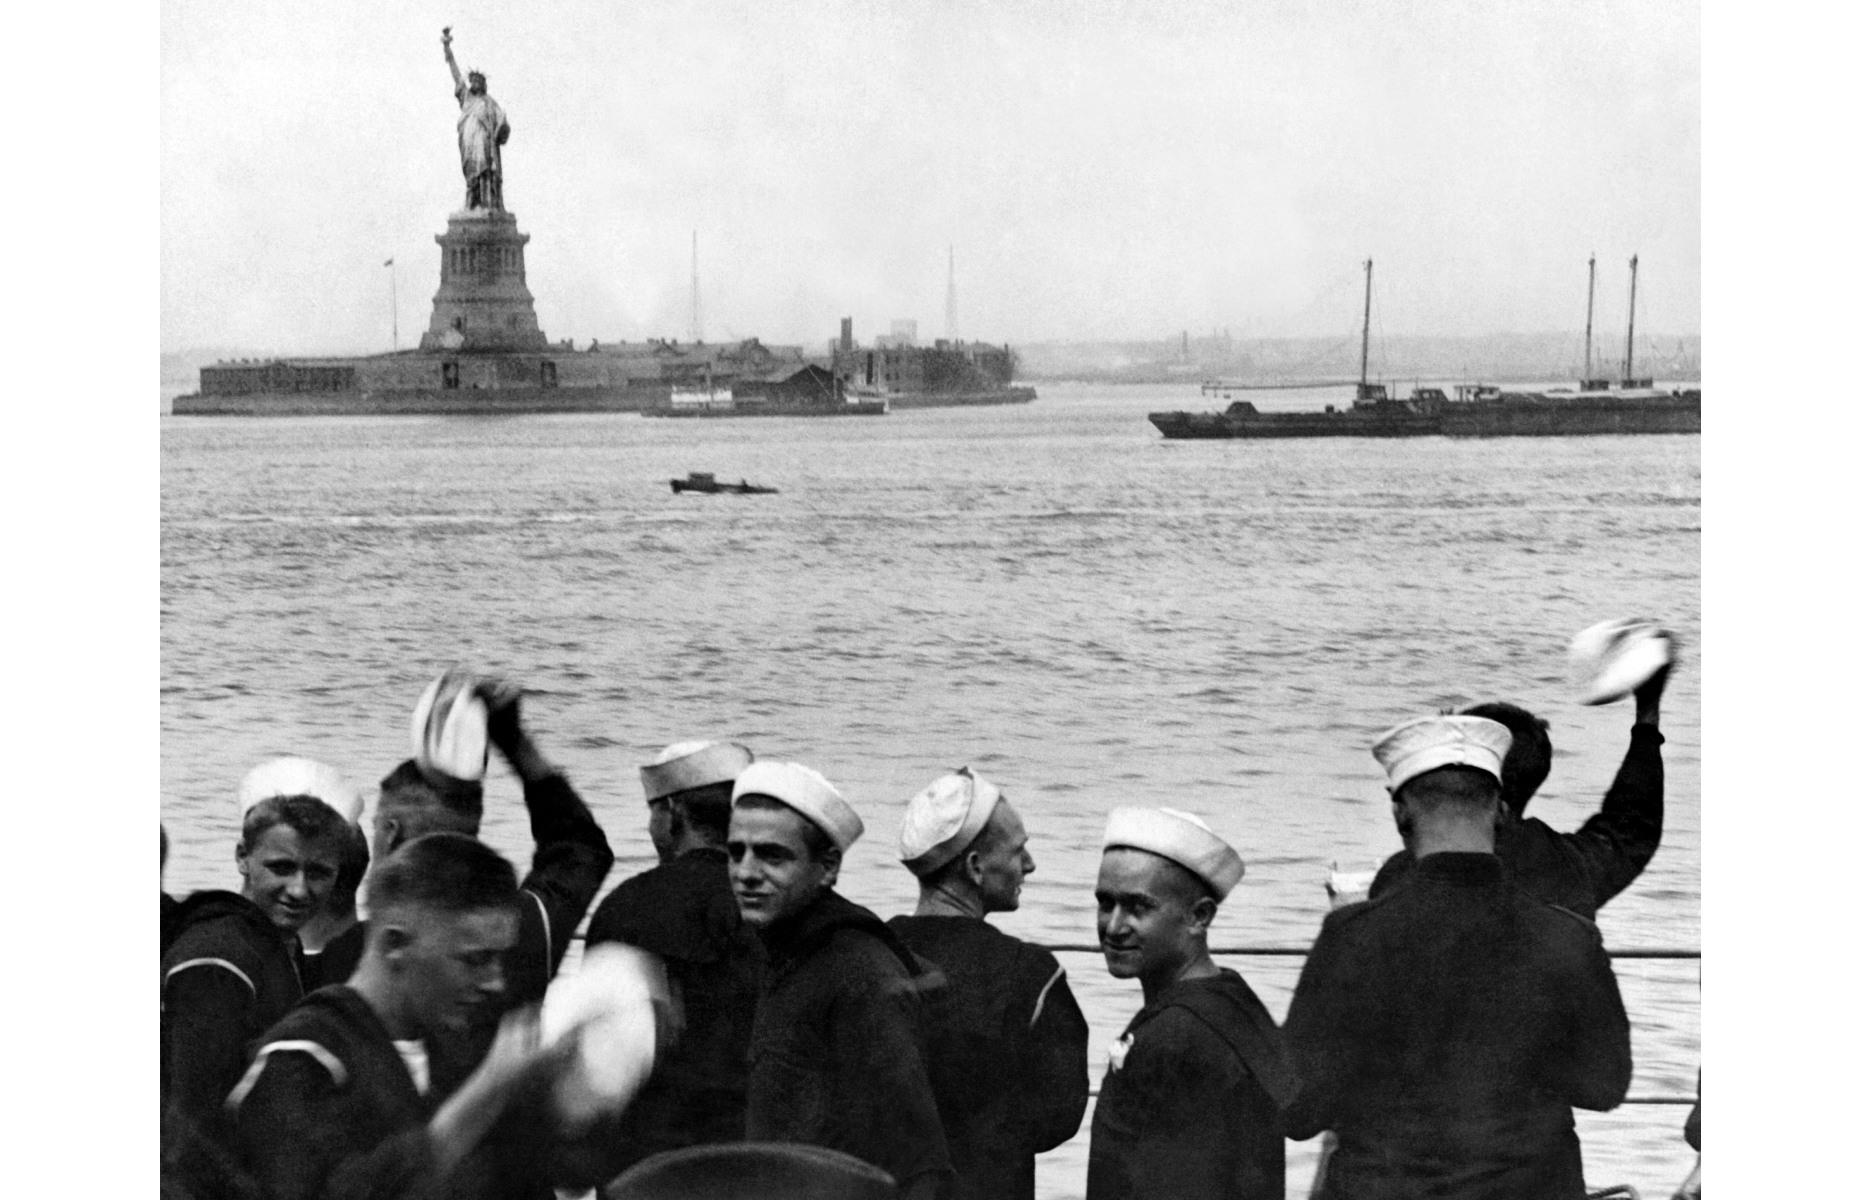 Pictured here being greeted by a group of sailors in 1920, Lady Liberty was gifted to America by France in the late 19th century. The brainchild of French sculptor Frederic-Auguste Bartholdi, the towering 305-feet (93m) high statue on Liberty Island was built from hammered copper. She owes her distinctive green hue to sunlight and rain, which caused the once-shiny copper to oxidize.